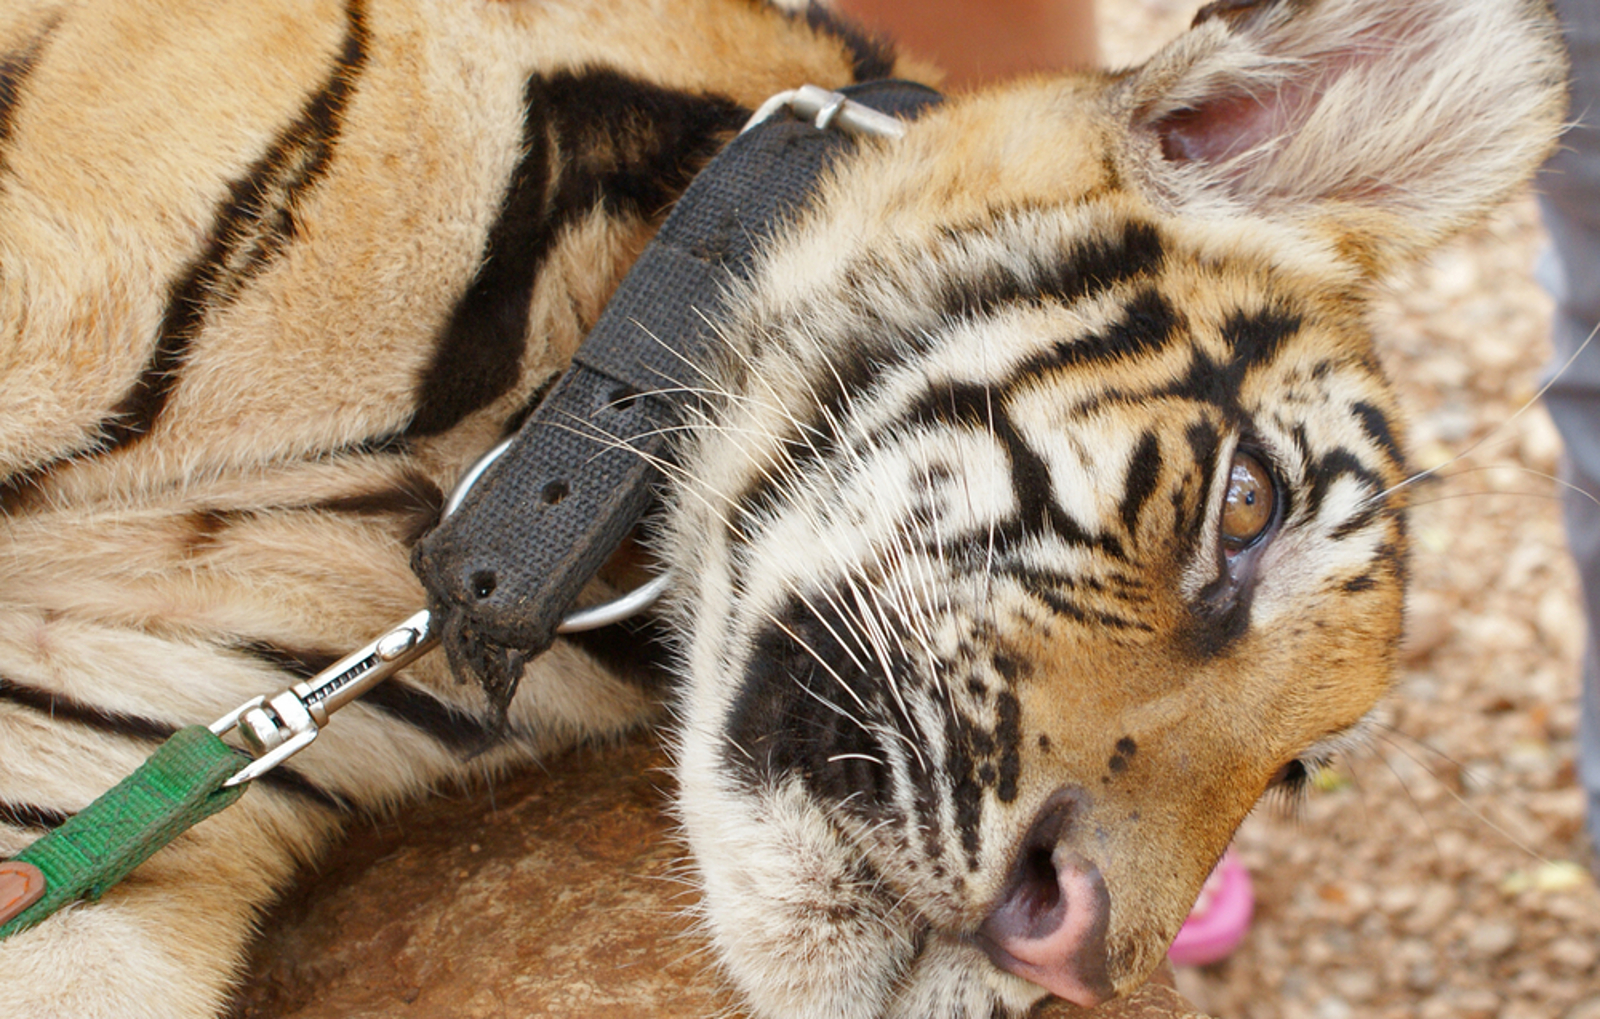 Investigation Reveals How Easy it is to Buy Exotic Animals Online – Why This NEEDS to Stop